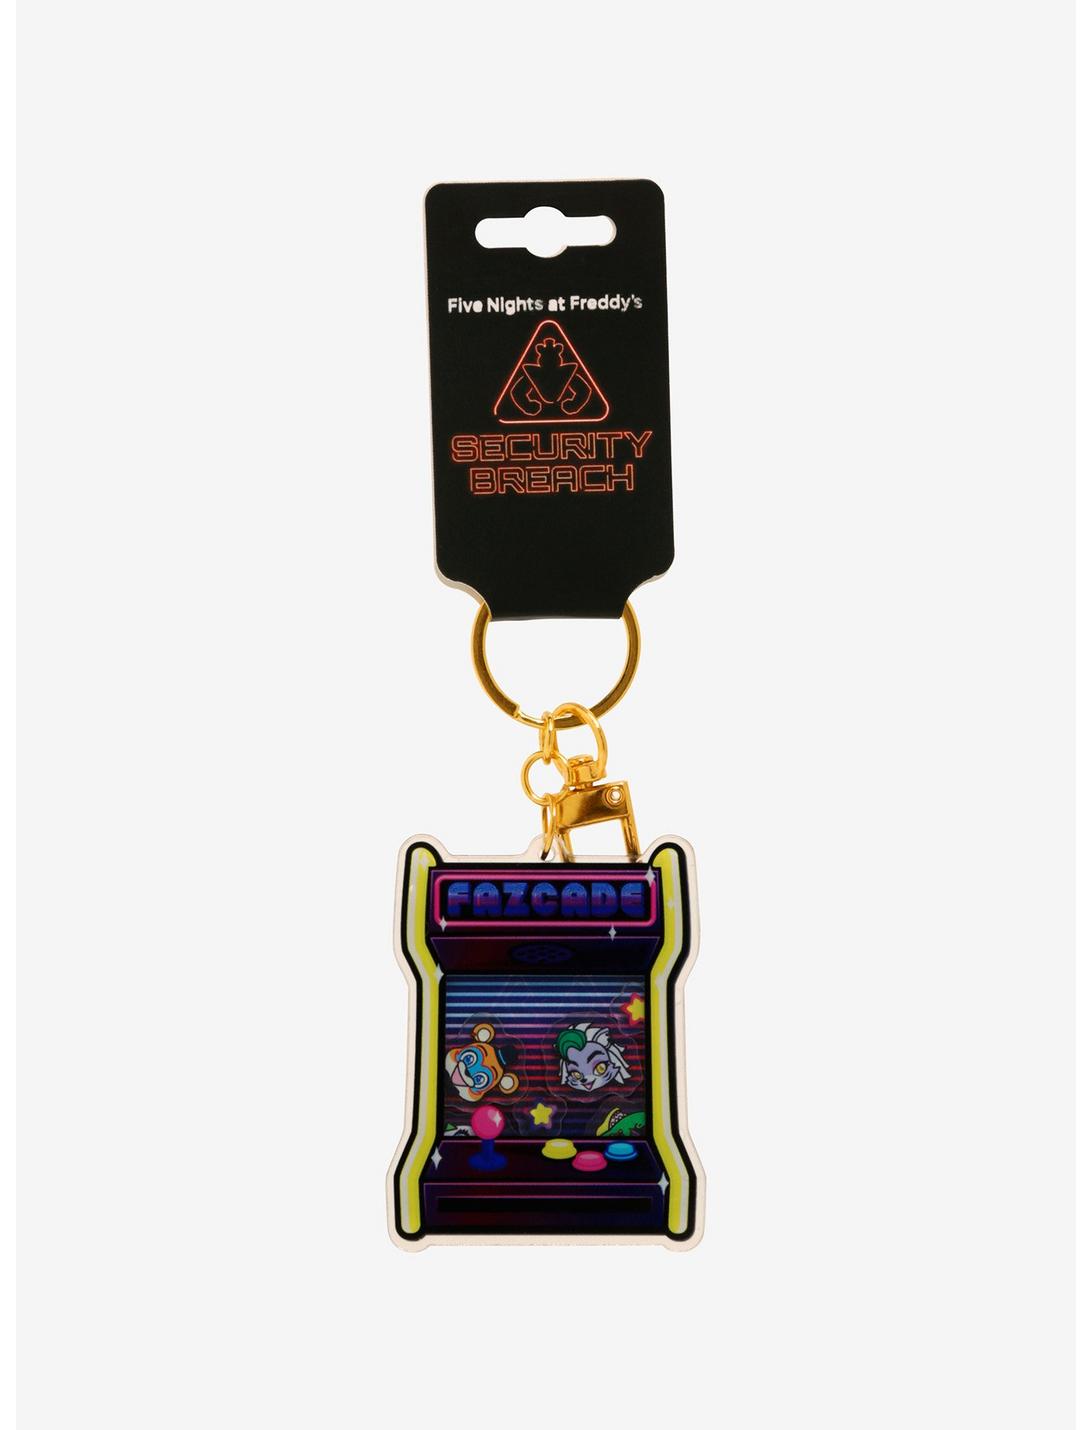 Five Nights at Freddy's: Security Breach Arcade Machine Shaker Key Chain Hot Topic Exclusive